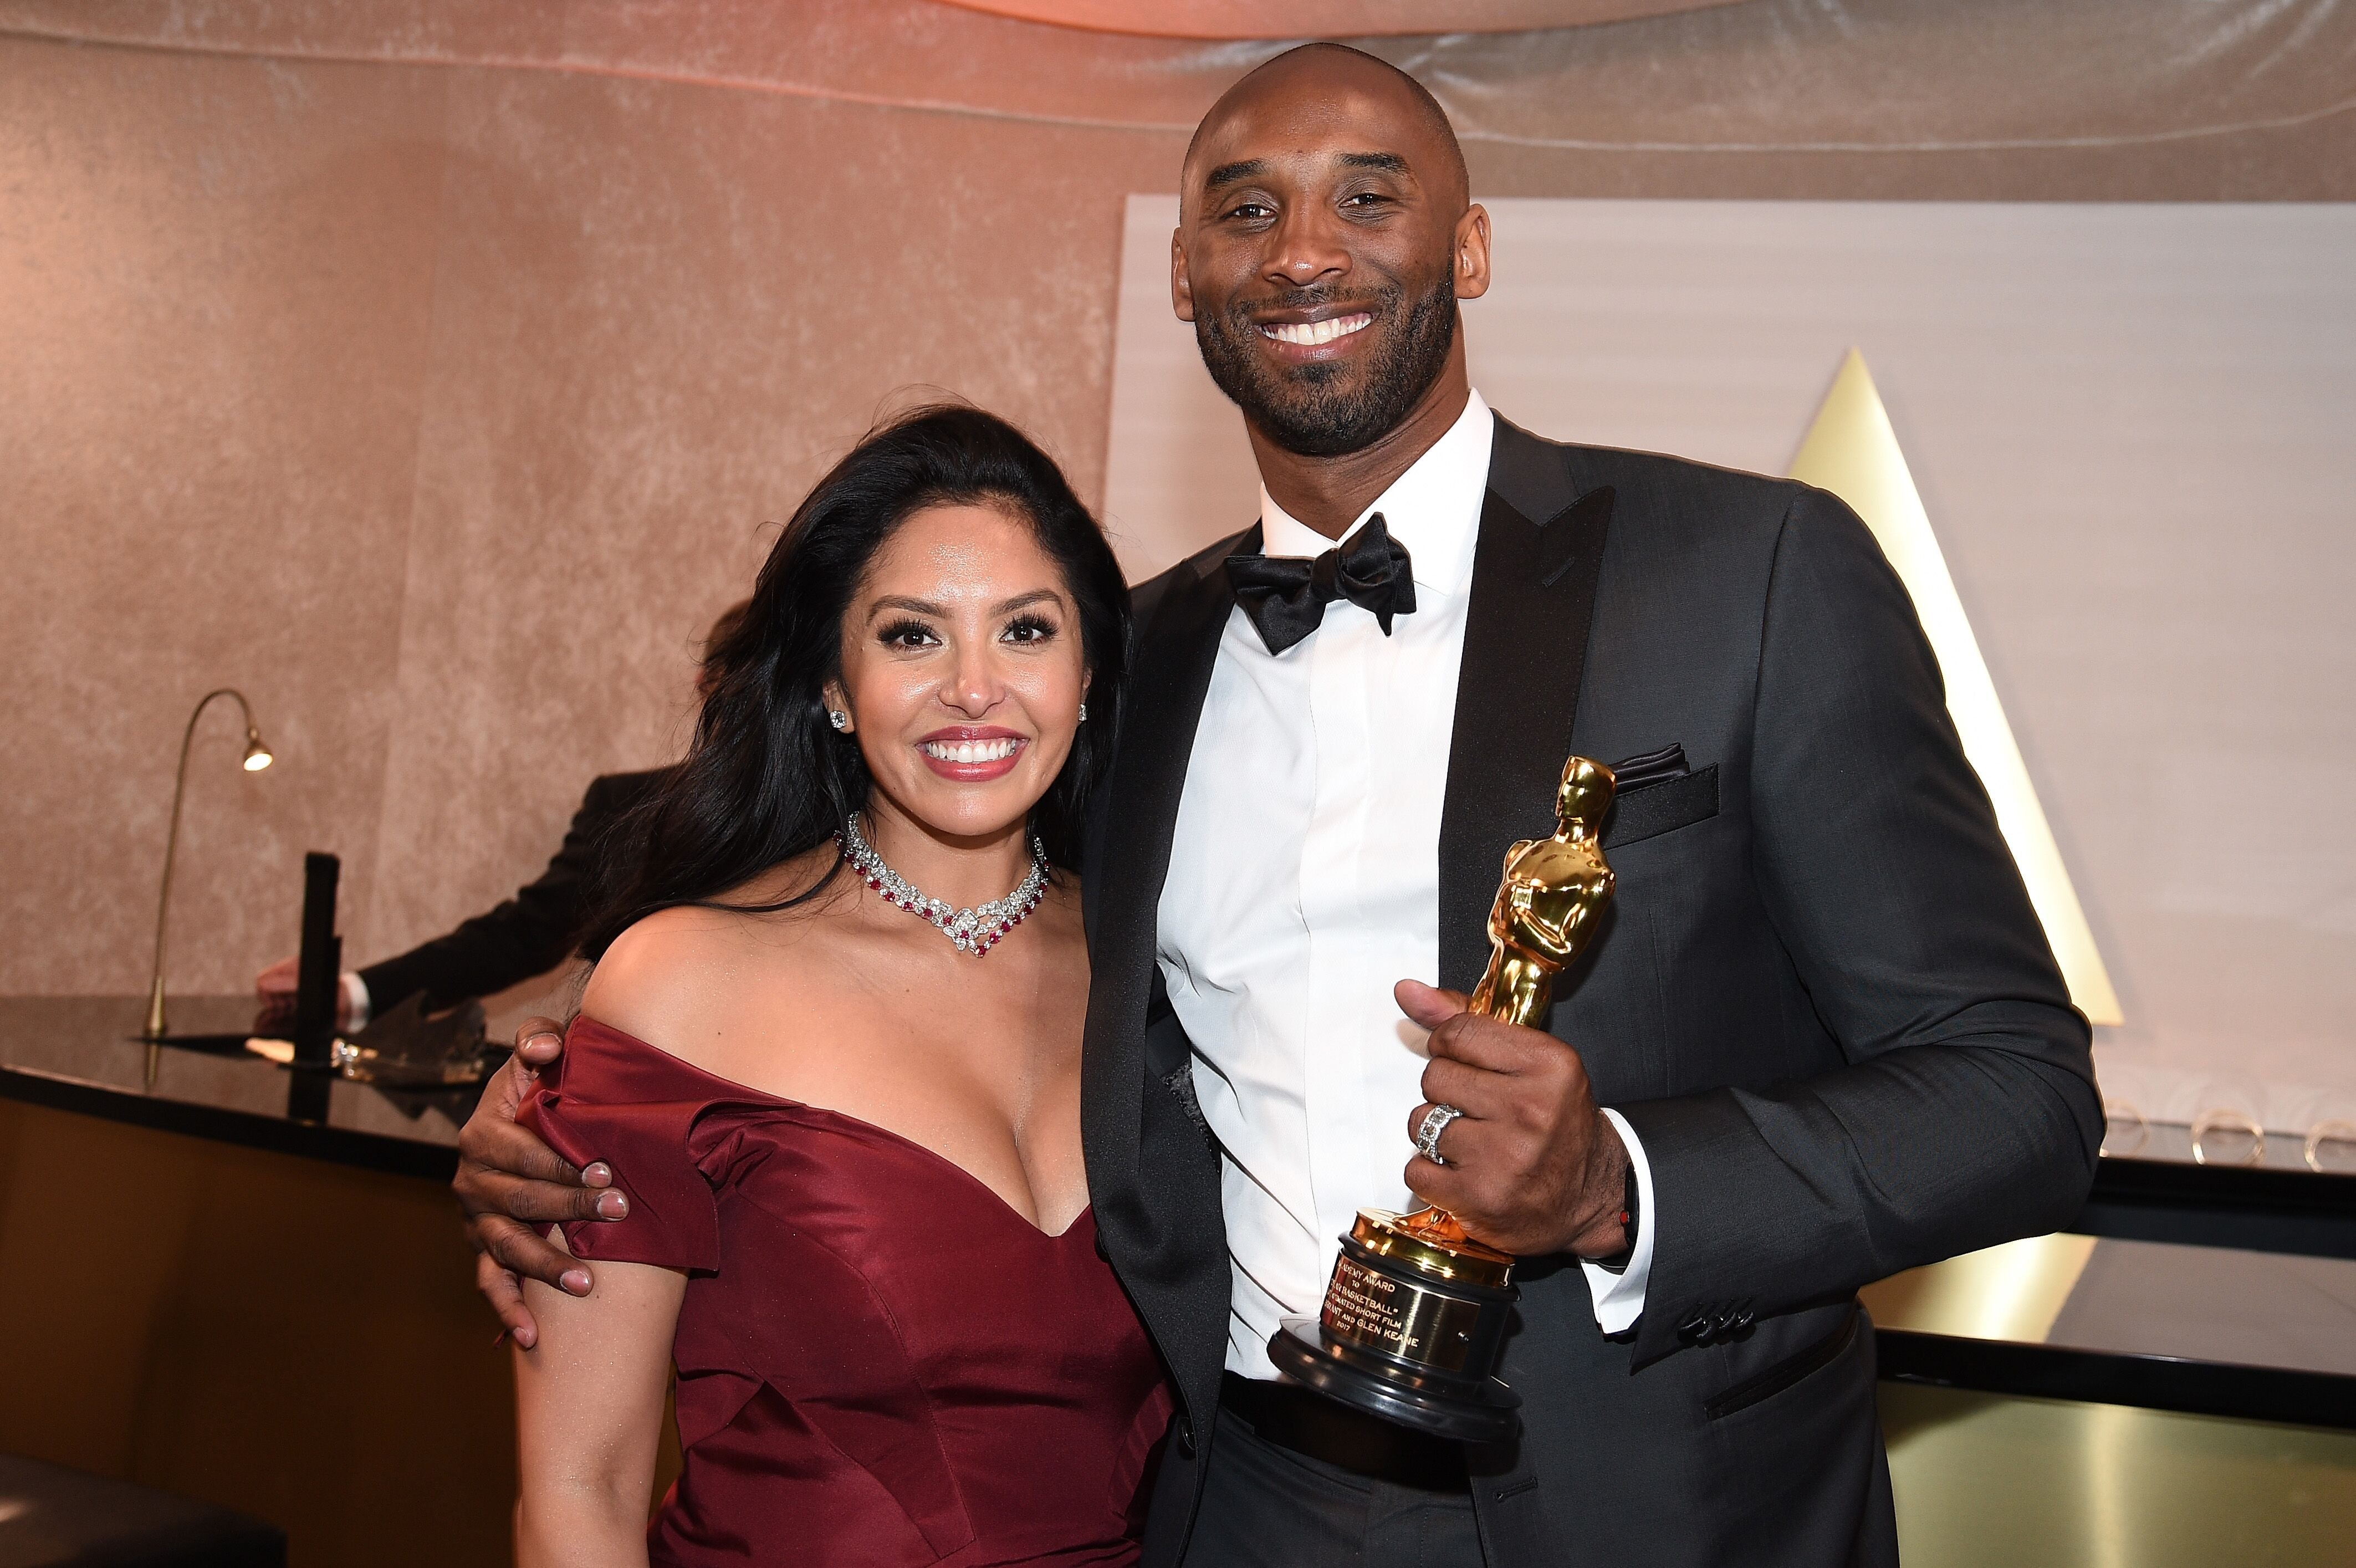 Kobe Bryant and wife Vanessa at the 90th Annual Academy Awards Governors Ball/ Source: Getty Images